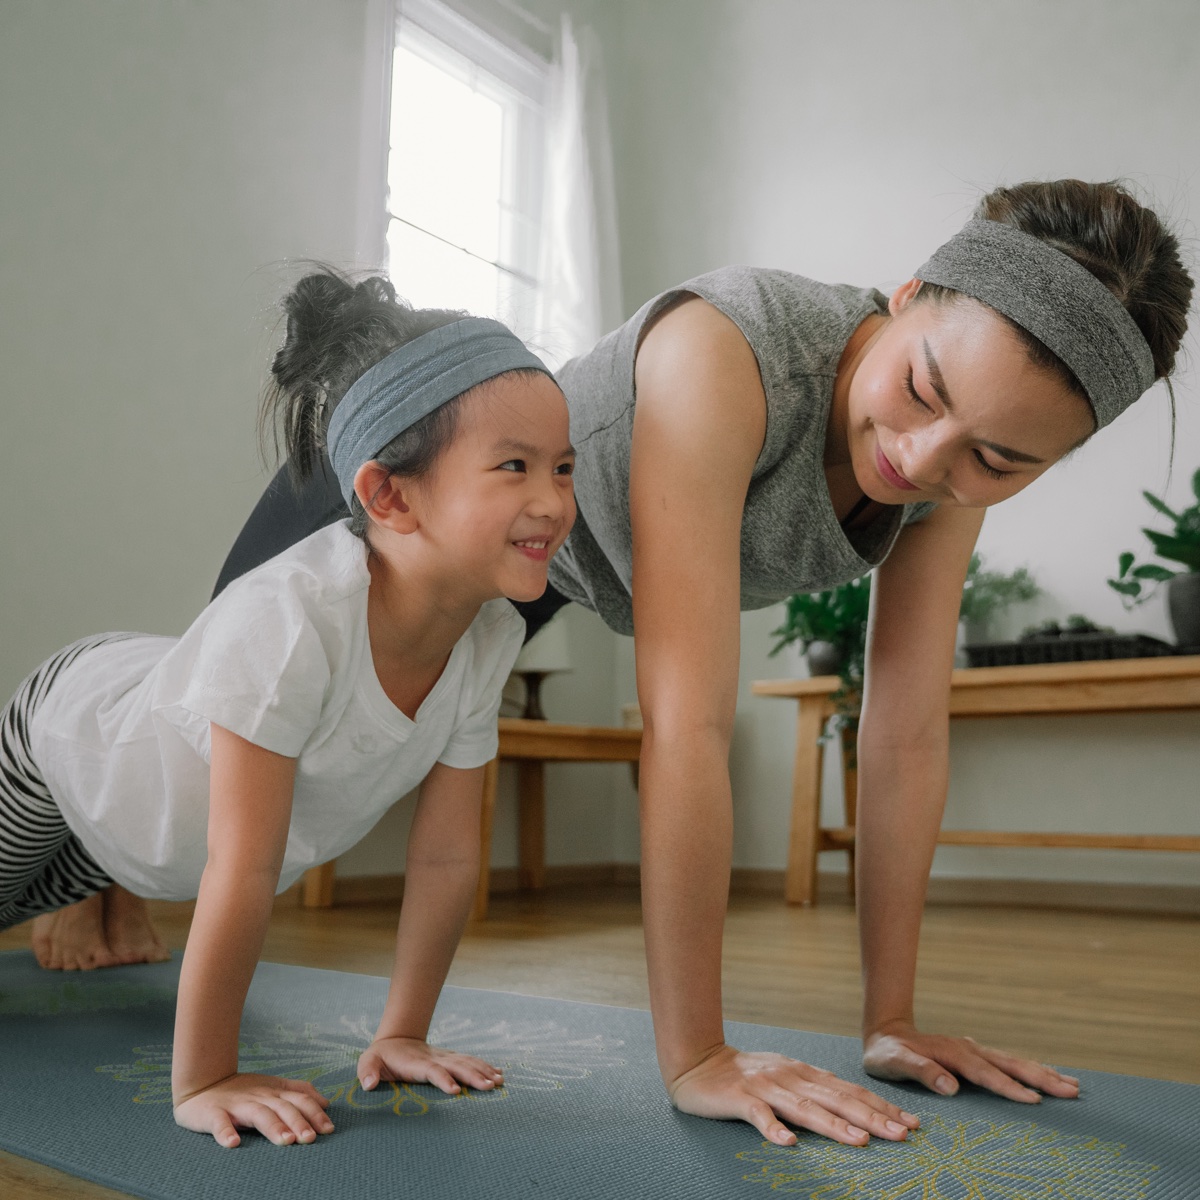 Mom and child doing mat exercises together.